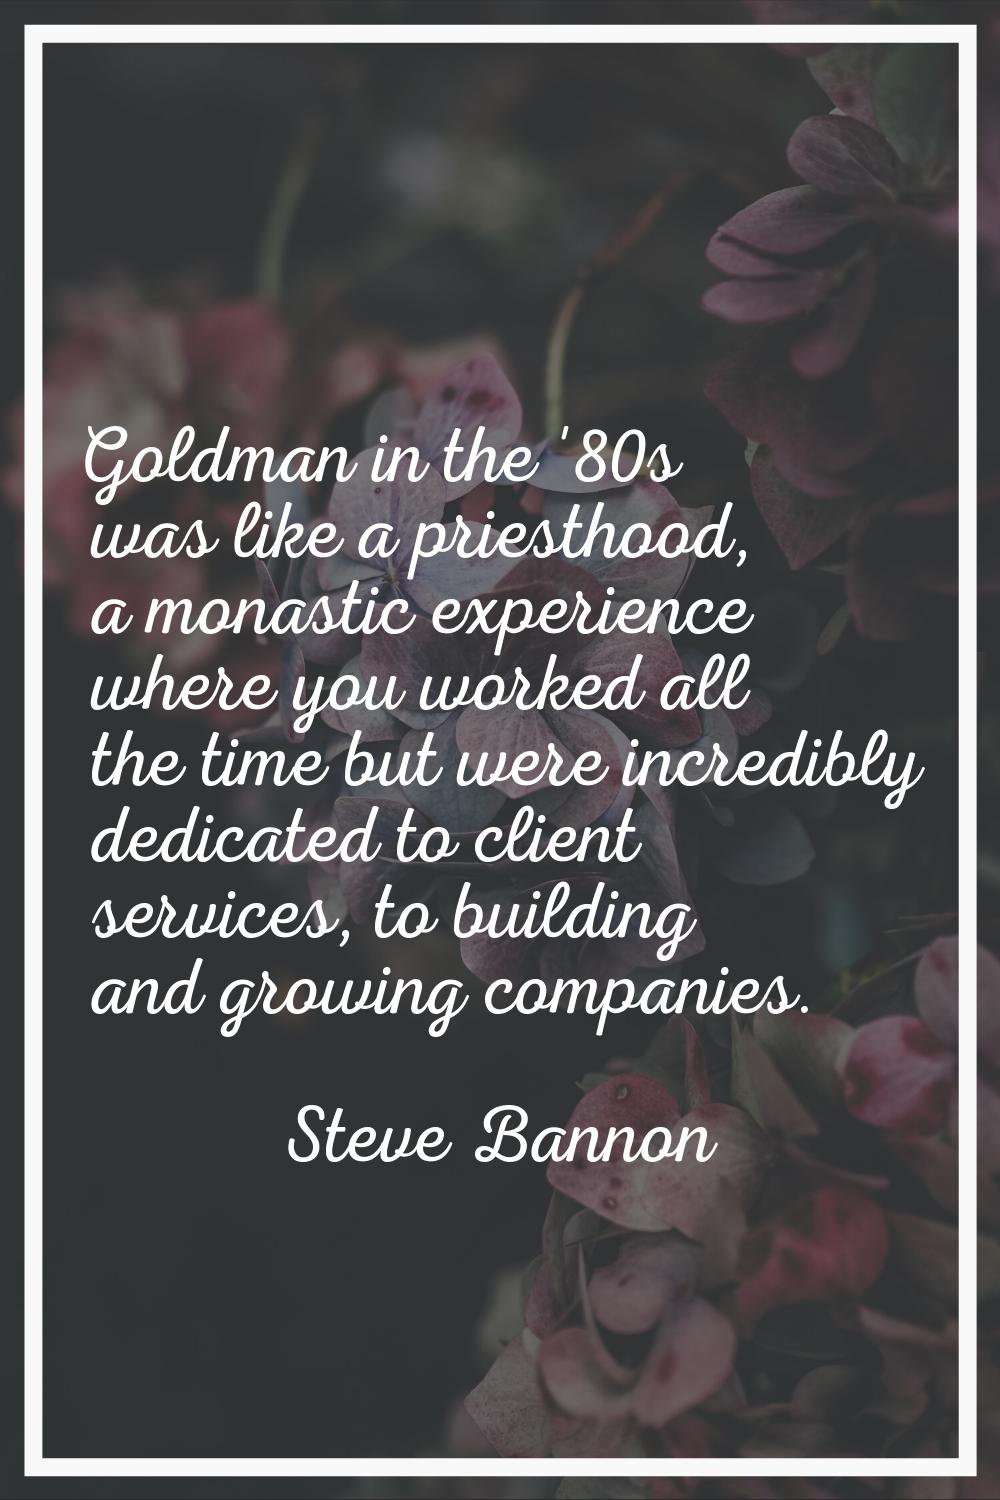 Goldman in the '80s was like a priesthood, a monastic experience where you worked all the time but 